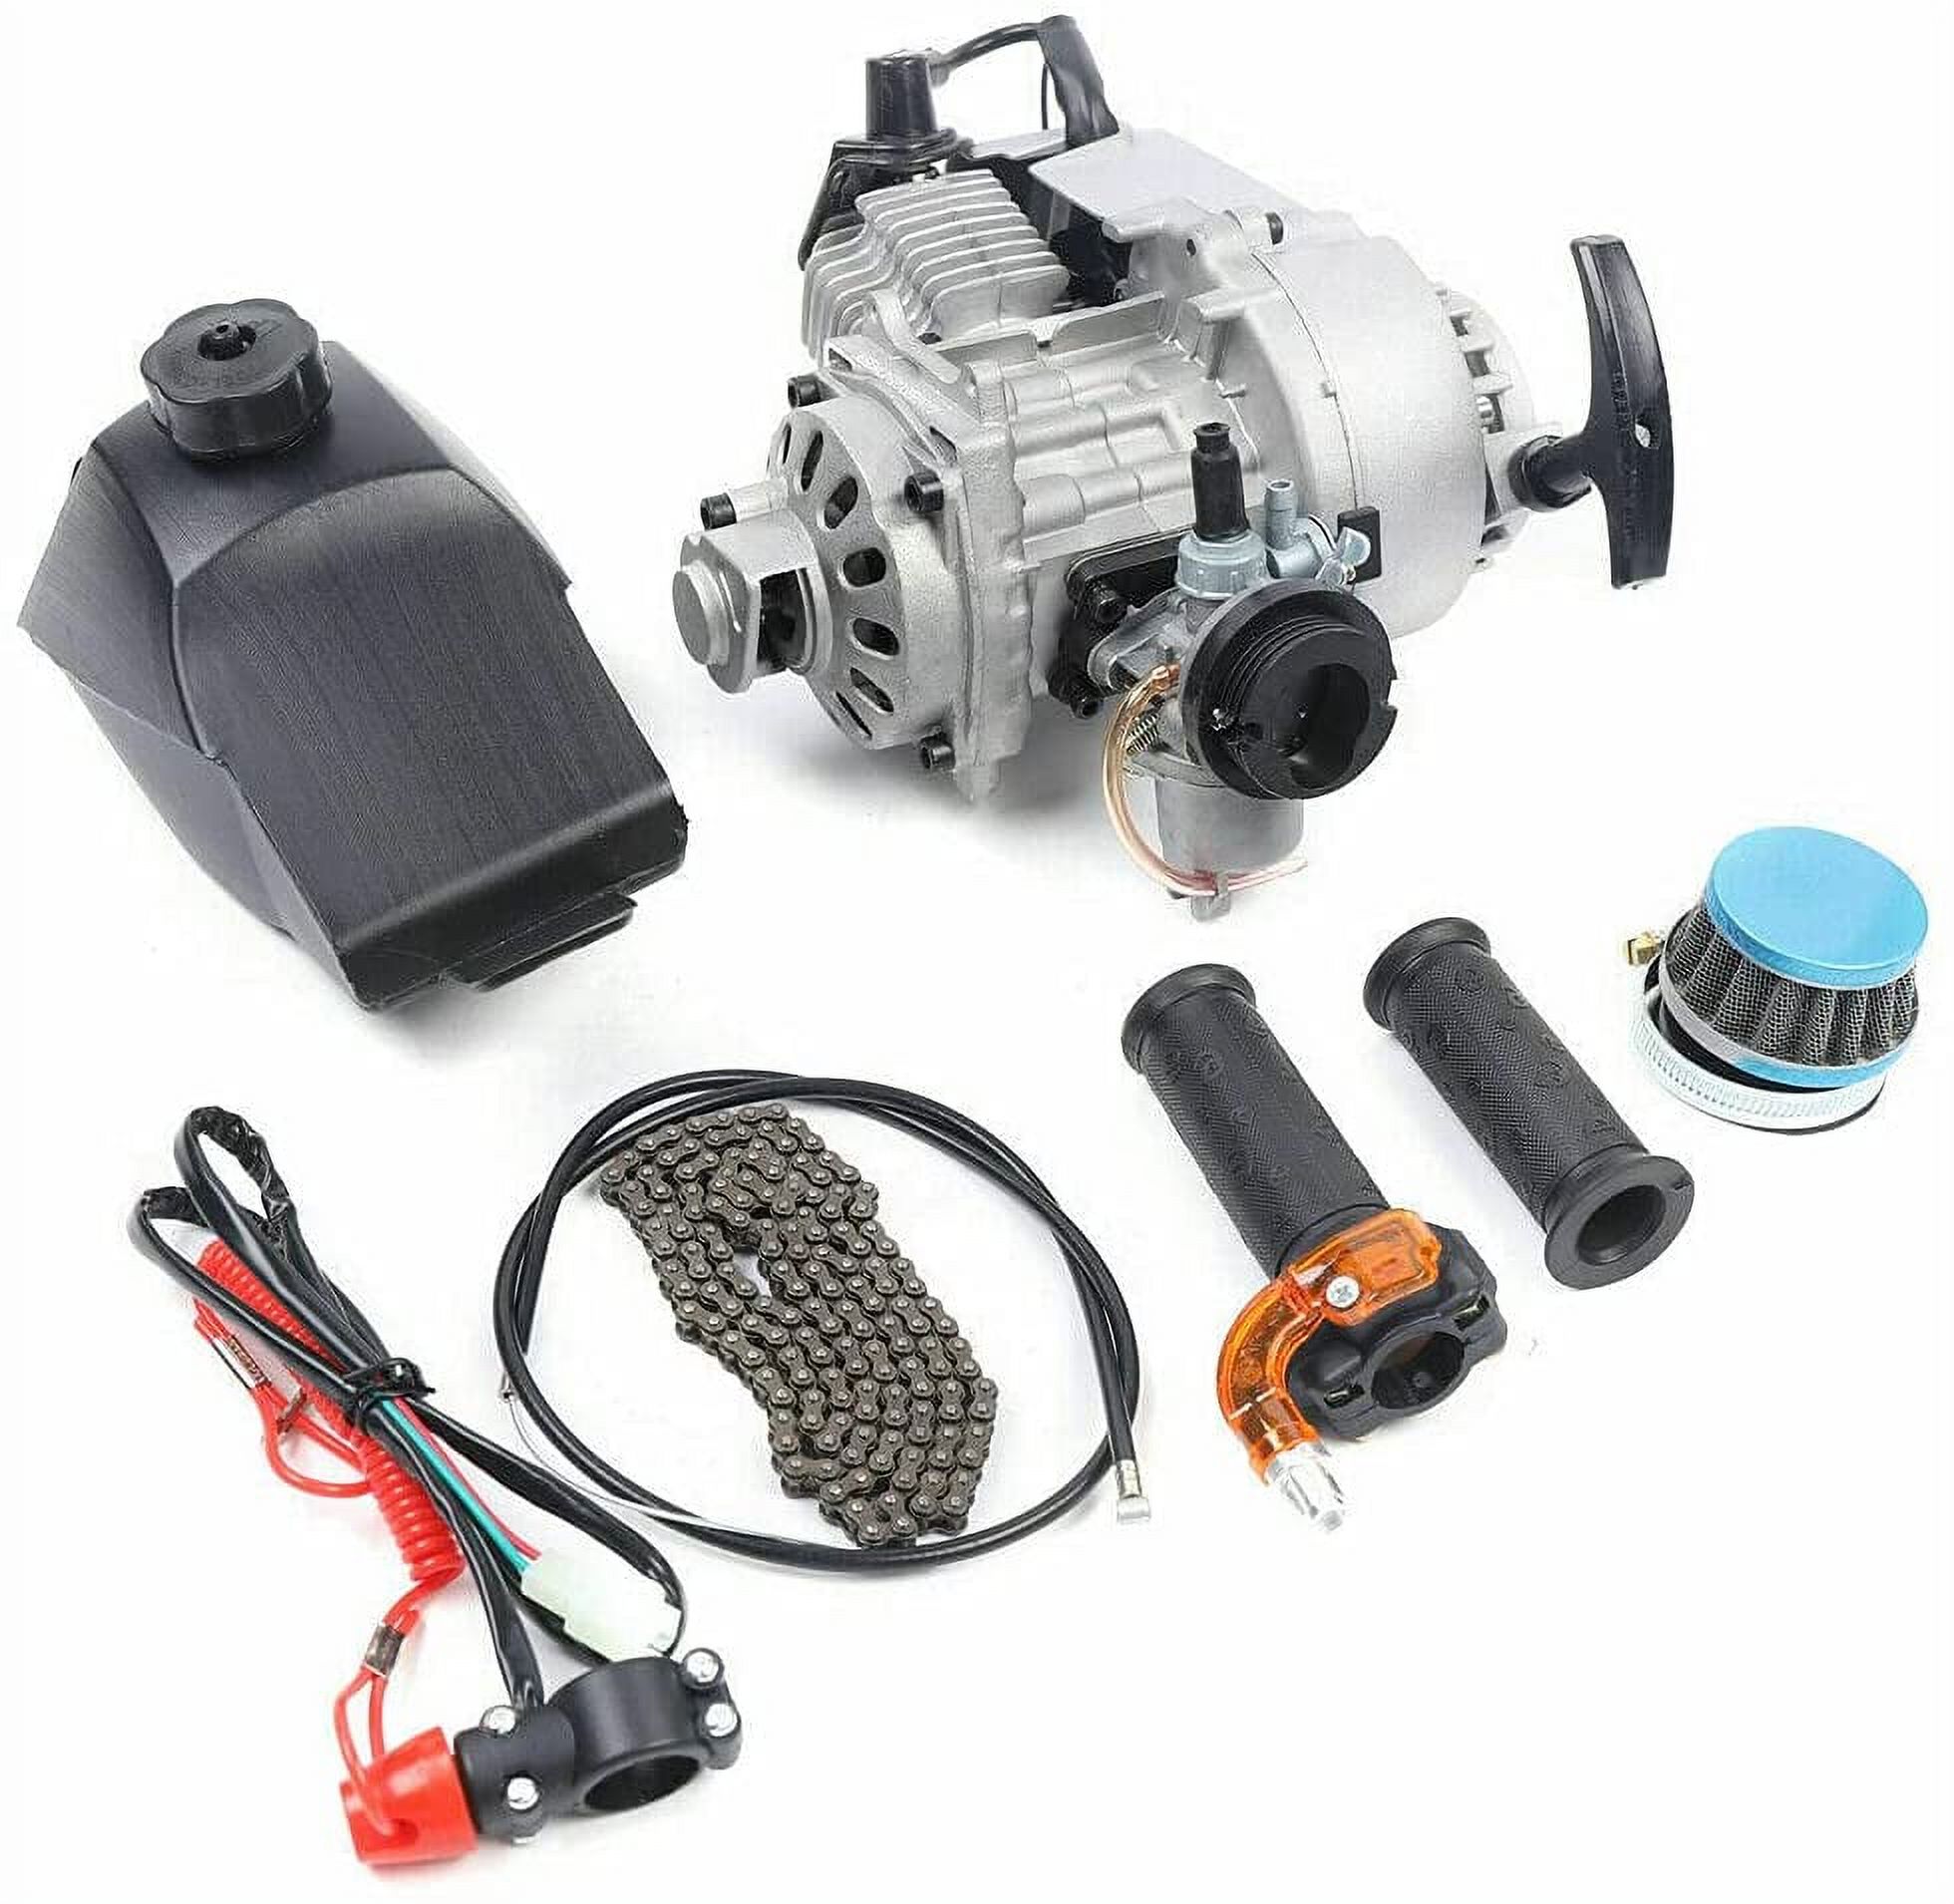 TFCFL 49cc 2 Stroke Engine Motor Kit Pull Start Engine Motor with Fuel Tank for Mini Dirt Bikes - image 1 of 7